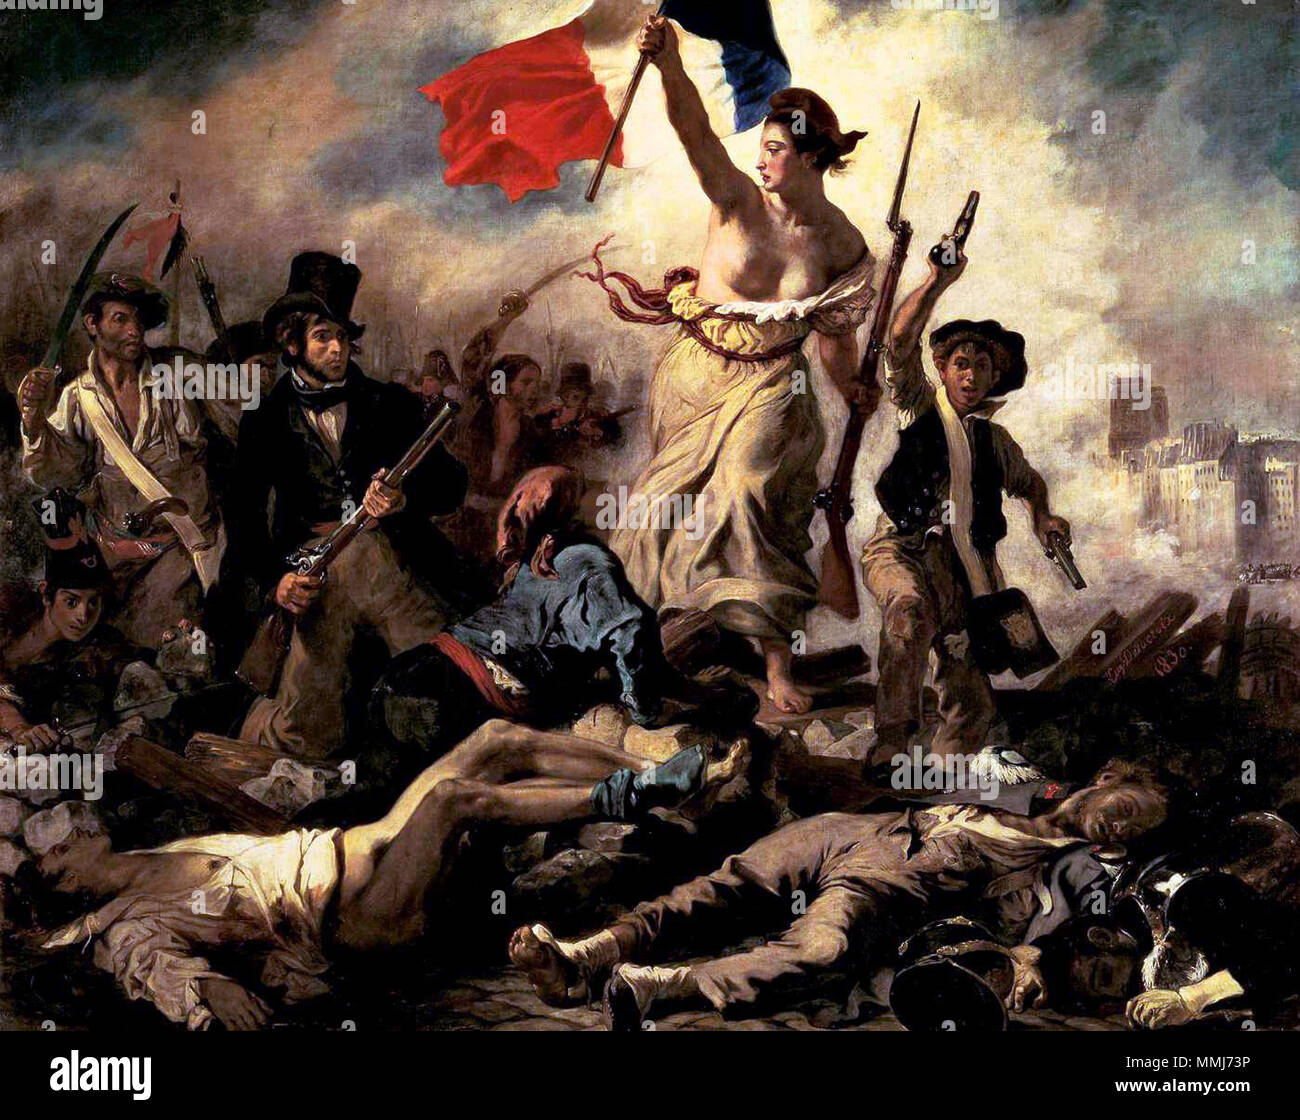 . Romantic history painting. Commemorates the French Revolution of 1830 (July Revolution) on 28 July 1830.  Liberty Leading the People. 1830. Delacroix - La liberte Stock Photo